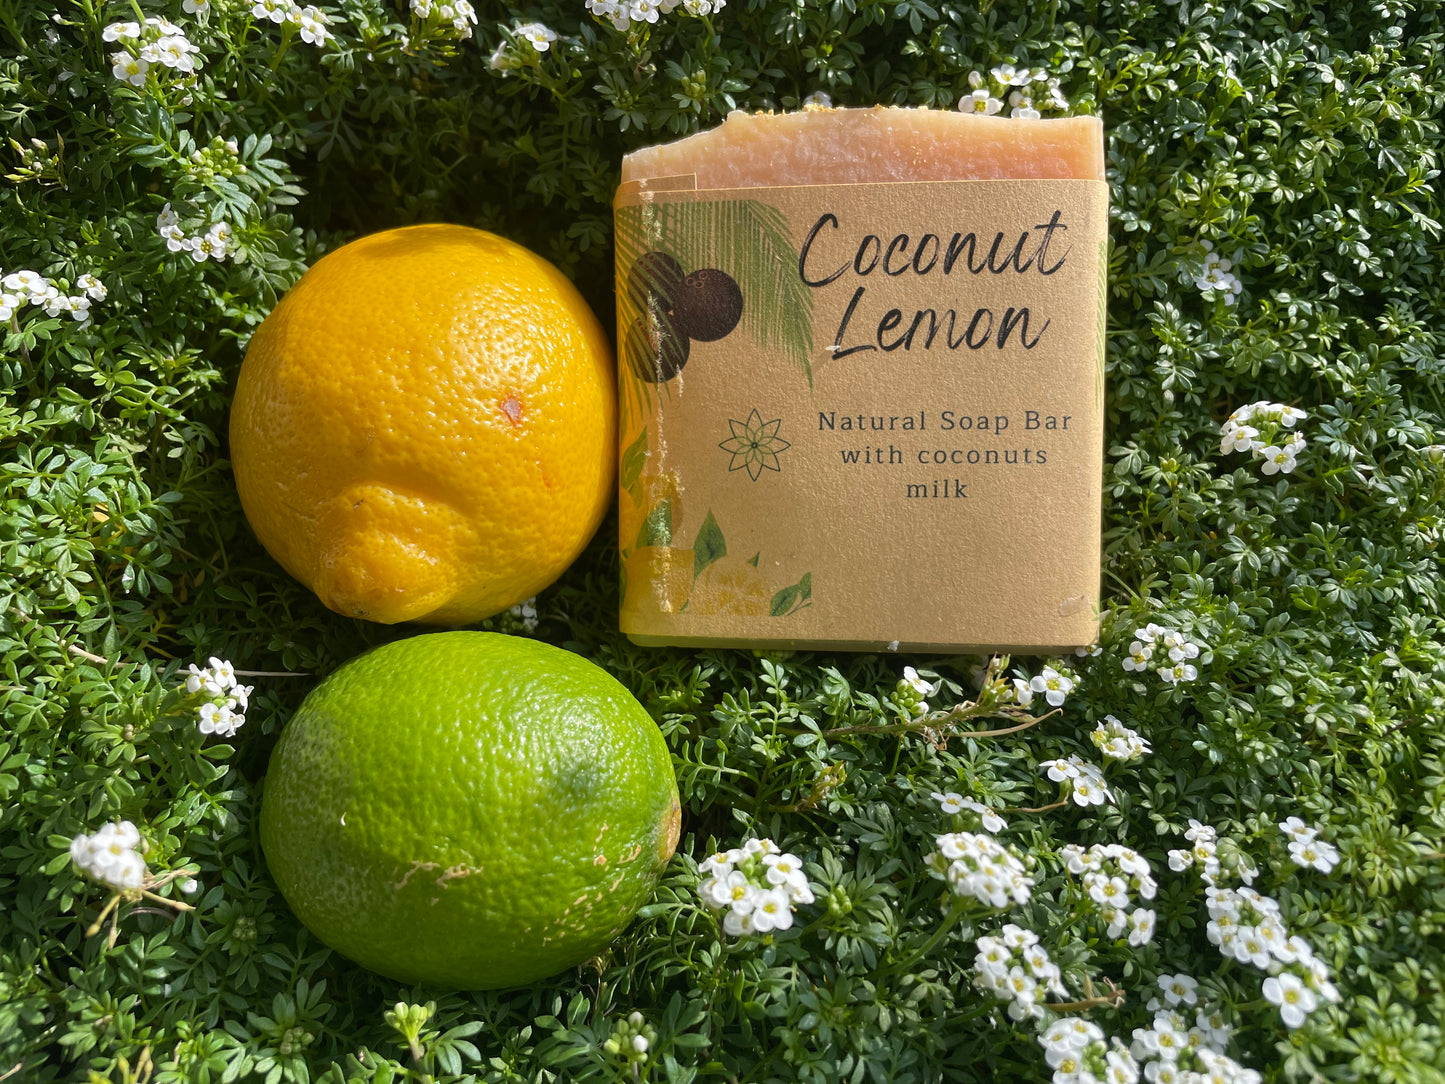 Coconut Lemon soap with real coconut milk, scented with coconut and lemon essential oil, the vegan soap is showing the front label and on the side it has 2 lemons green and yellow, everything is lay on a bed of wild flowers